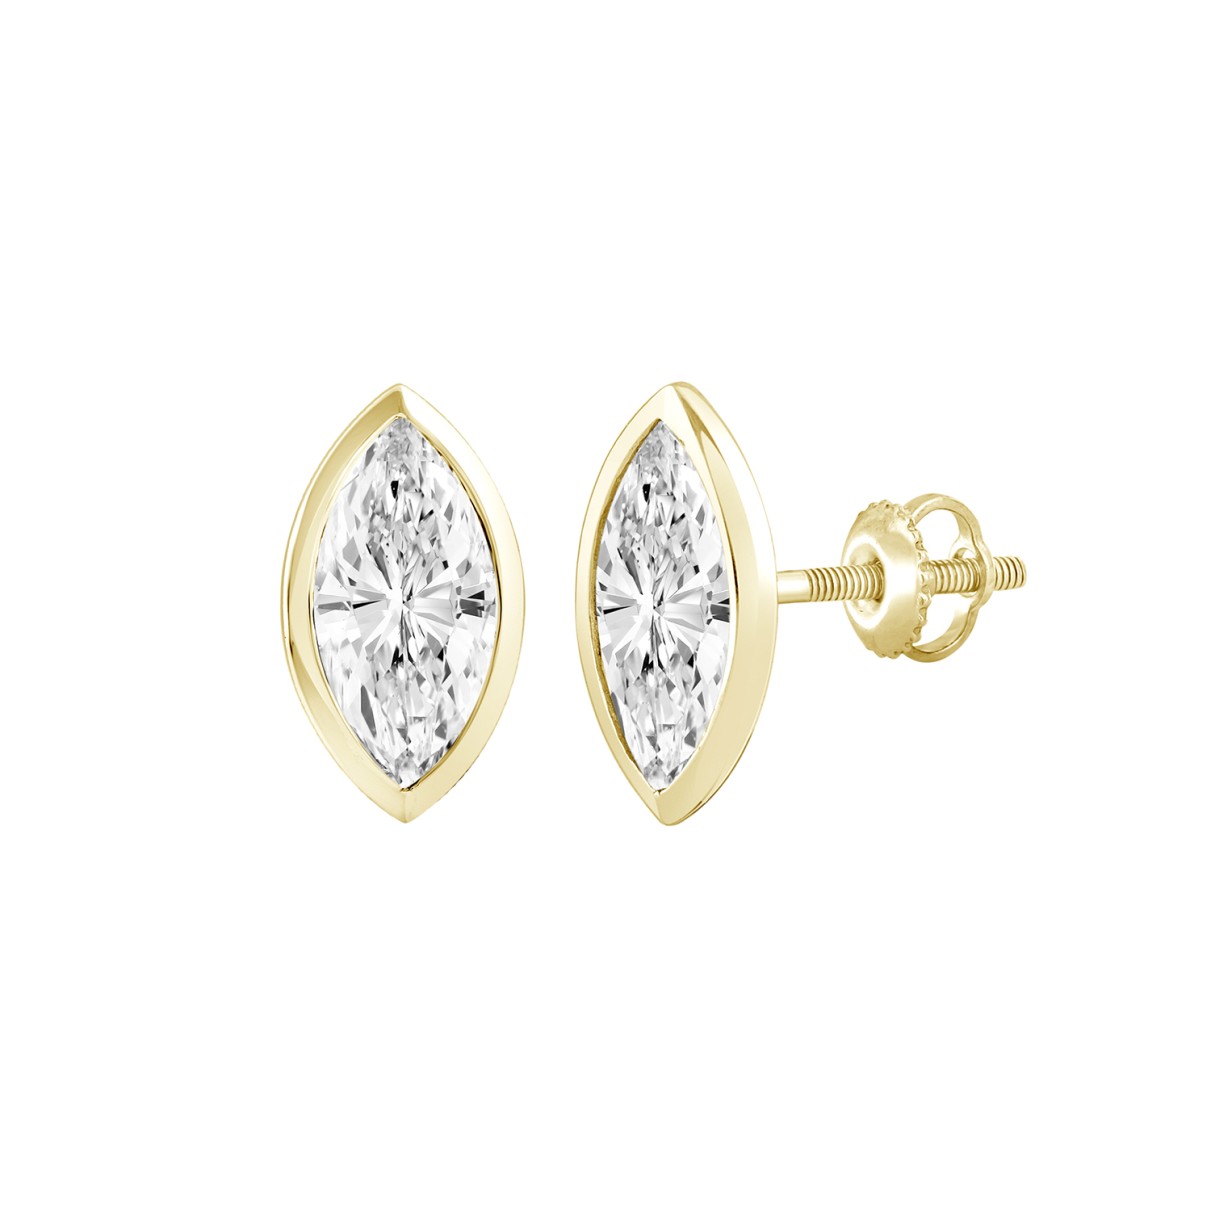 LADIES SOLITAIRE EARRINGS  2CT MARQUISE DIAMOND 14K YELLOW GOLD